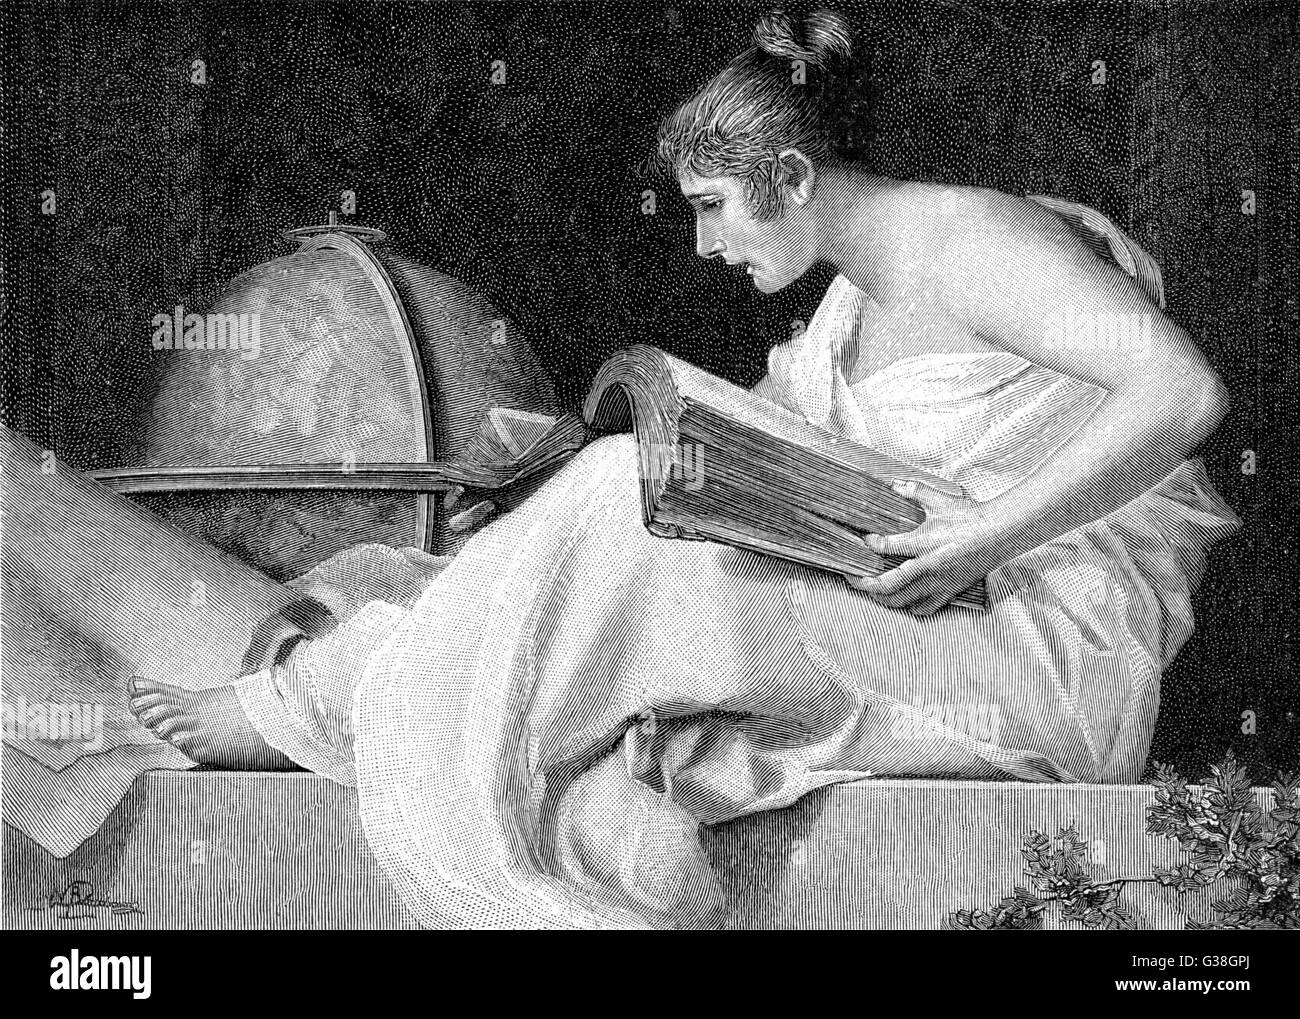 A lady with her feet up reads  a heavy book. Stock Photo